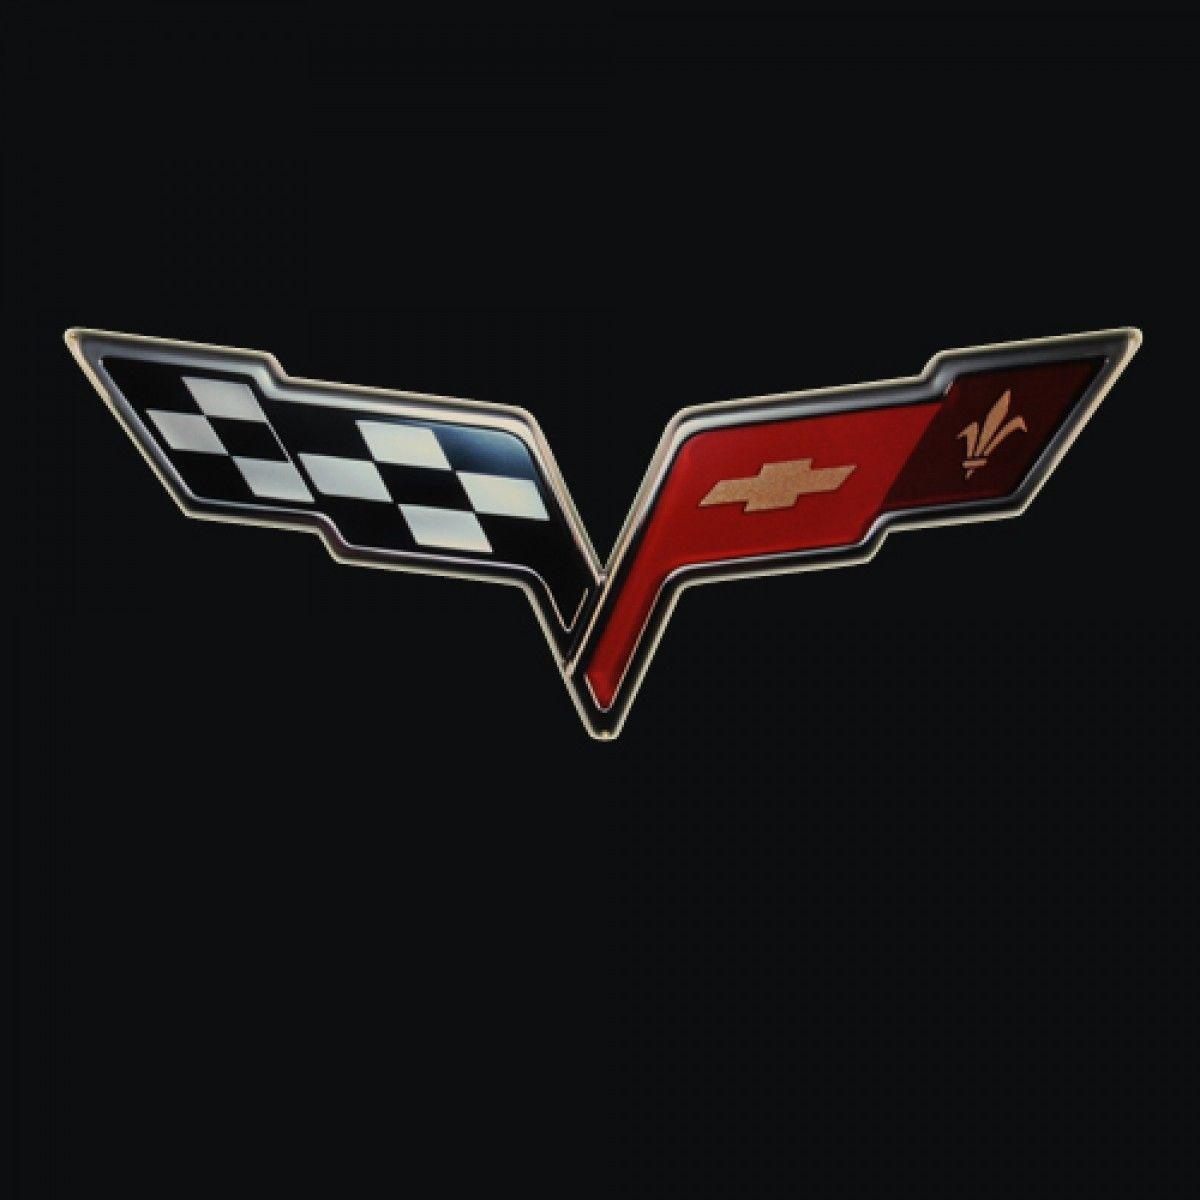 Free download Corvette Logo Wallpaper Generator for Mobile Devices Solidly  Stated 640x1000 for your Desktop Mobile  Tablet  Explore 46 C7 Corvette  Logo Wallpaper  C7 Corvette Wallpaper Corvette Background Corvette C7  Wallpaper